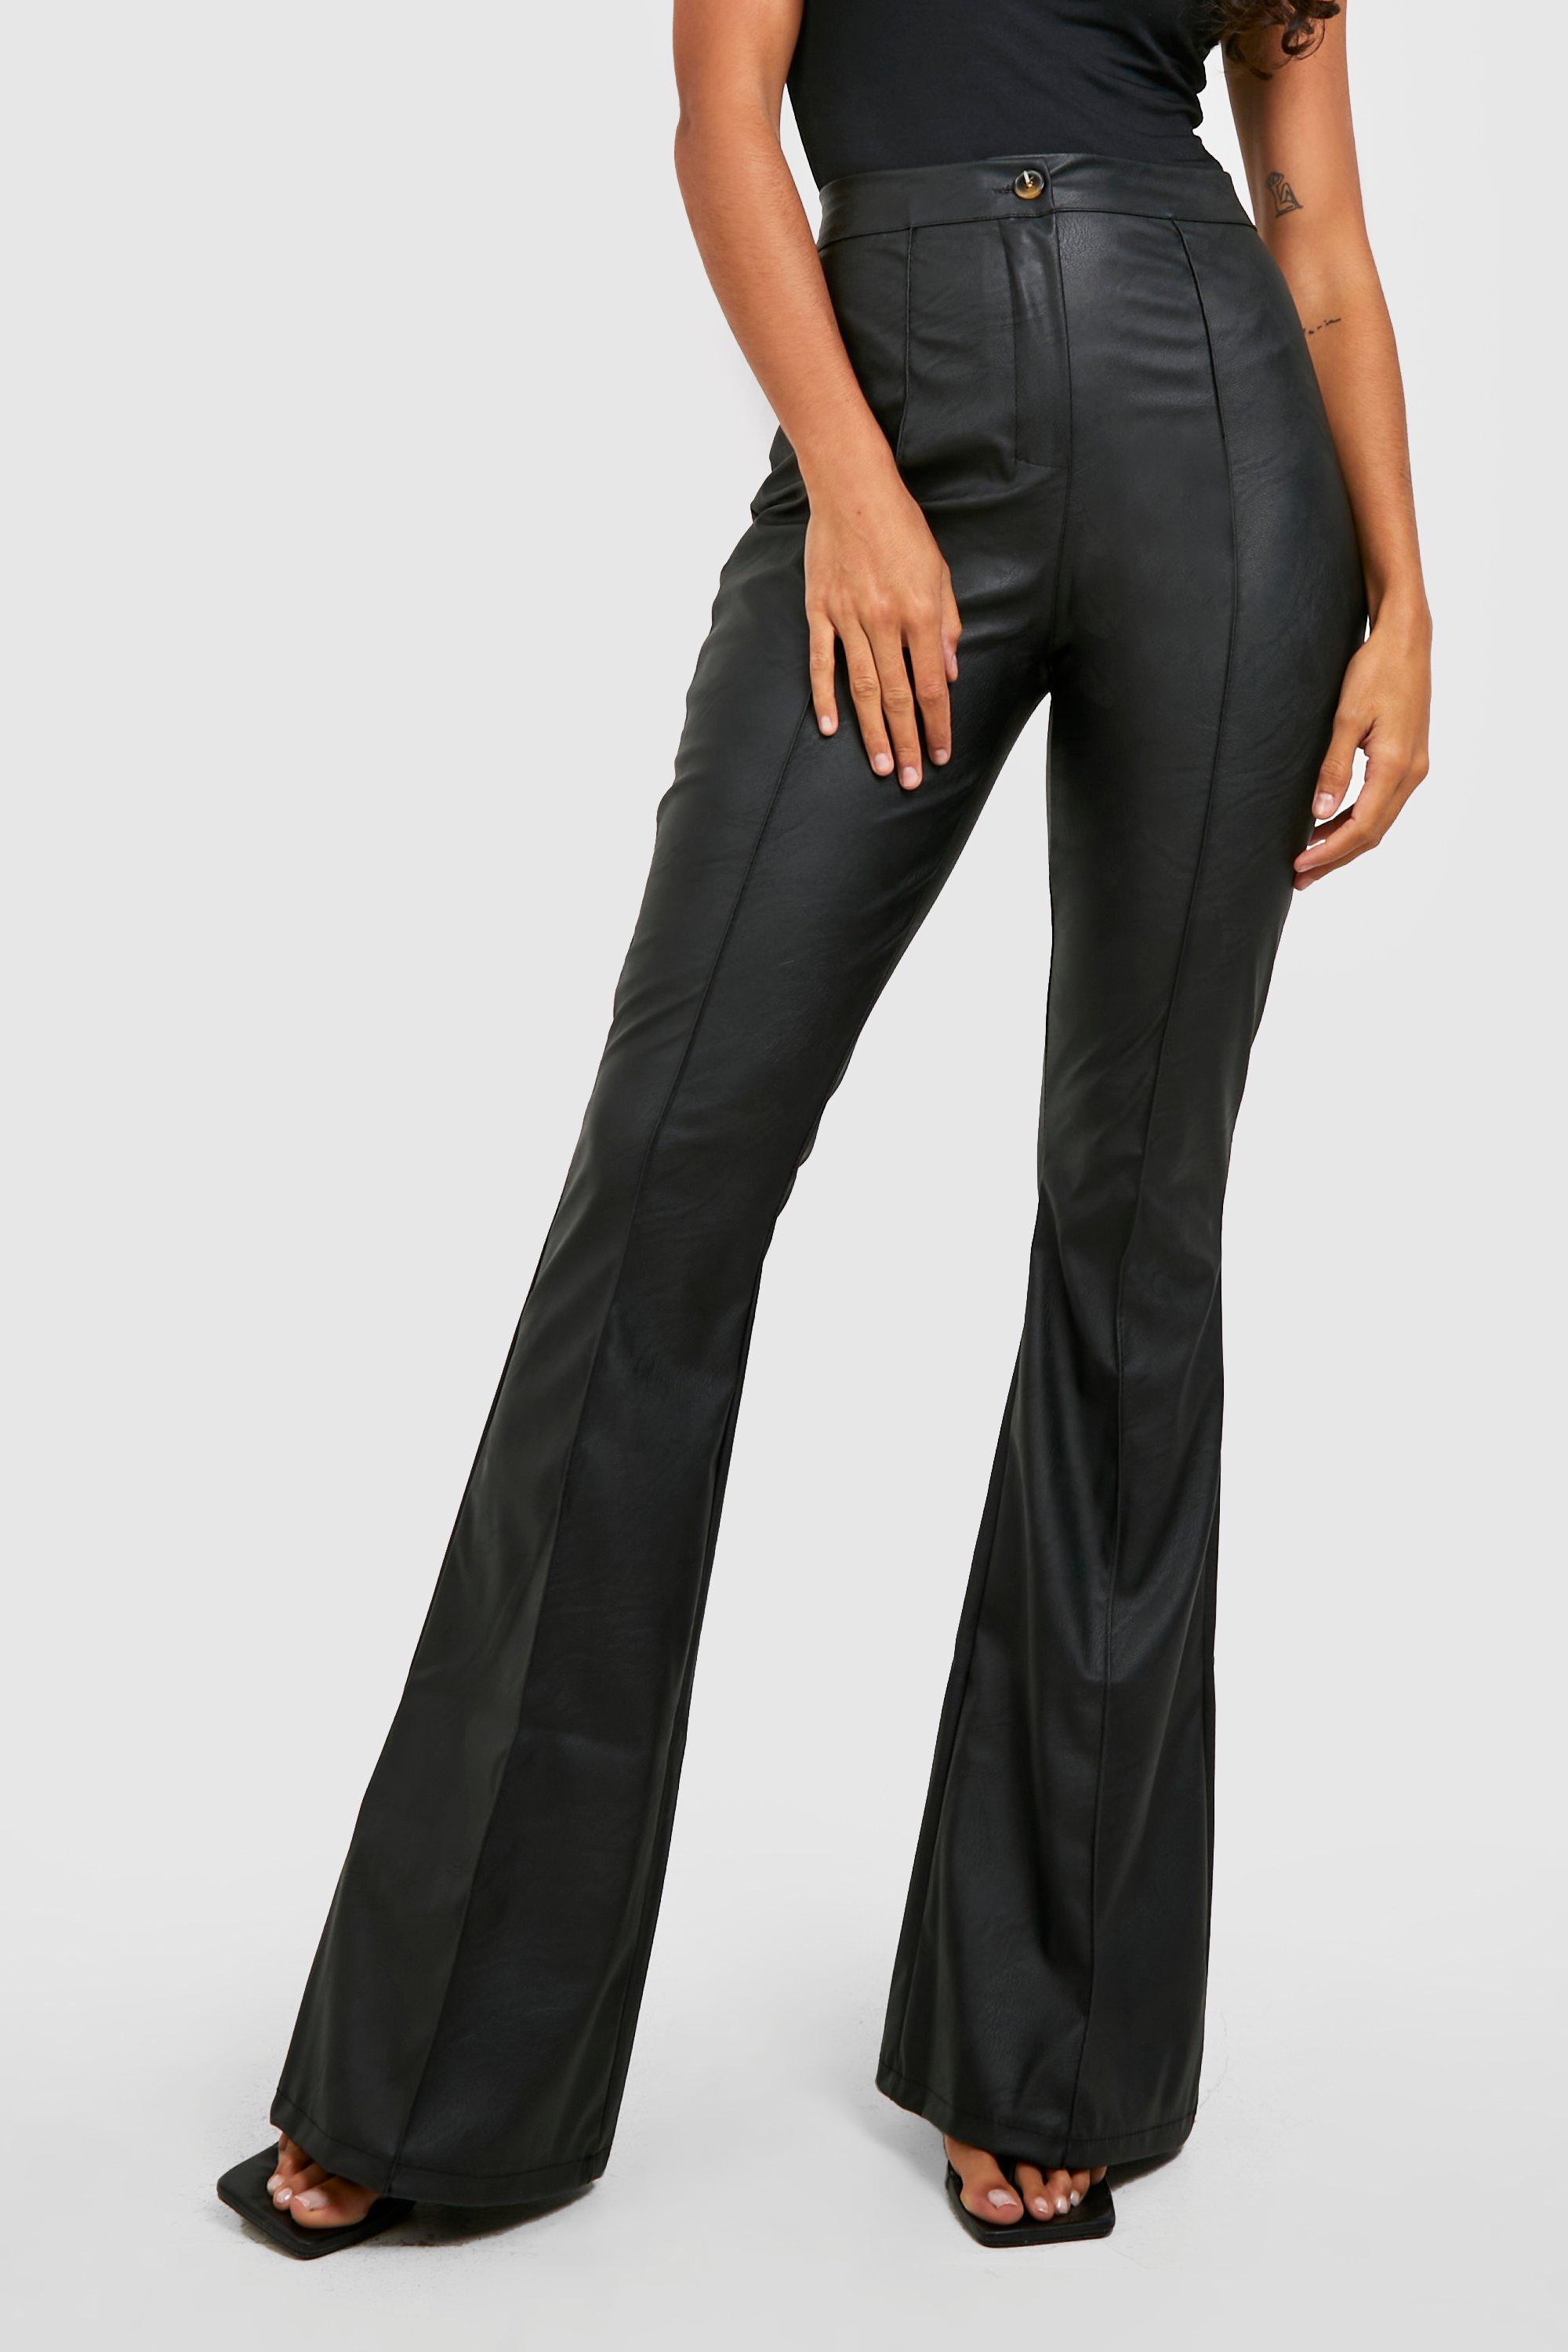 High Waist Faux Leather Flare  High waisted leather trousers